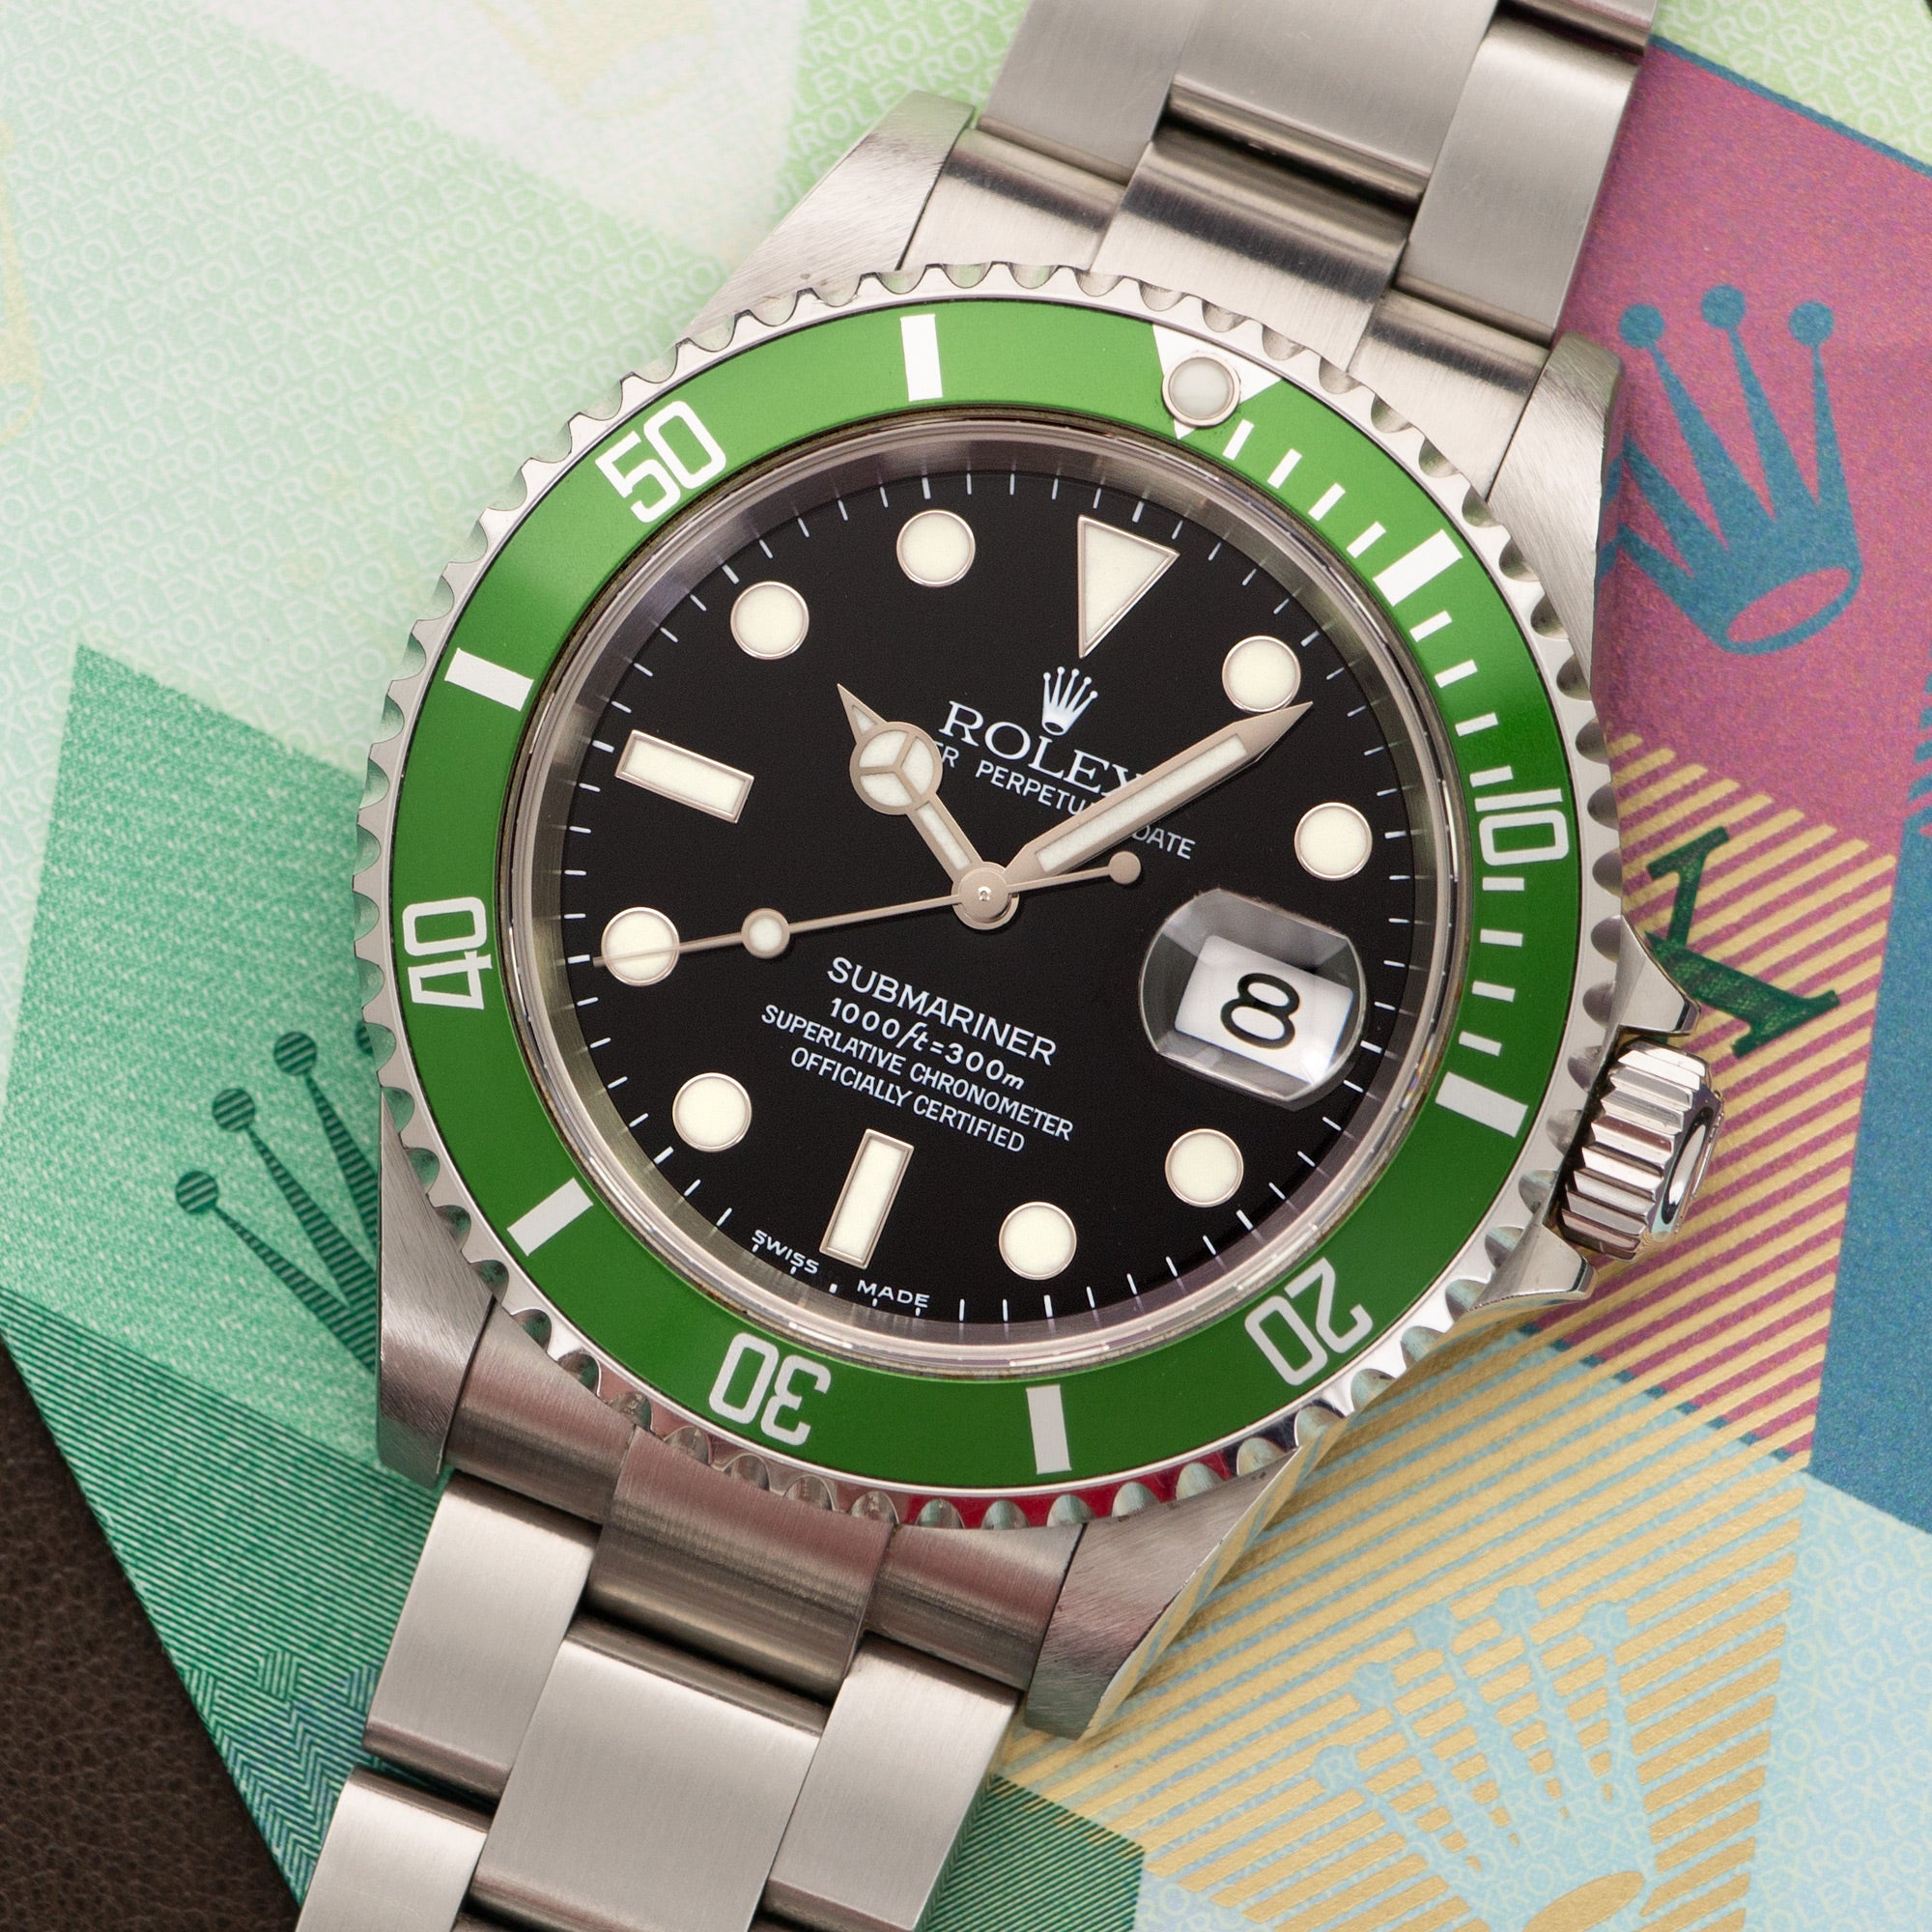 Rolex - Rolex Submariner Flat IV Watch Ref. 16610 with Original Box and Papers - The Keystone Watches